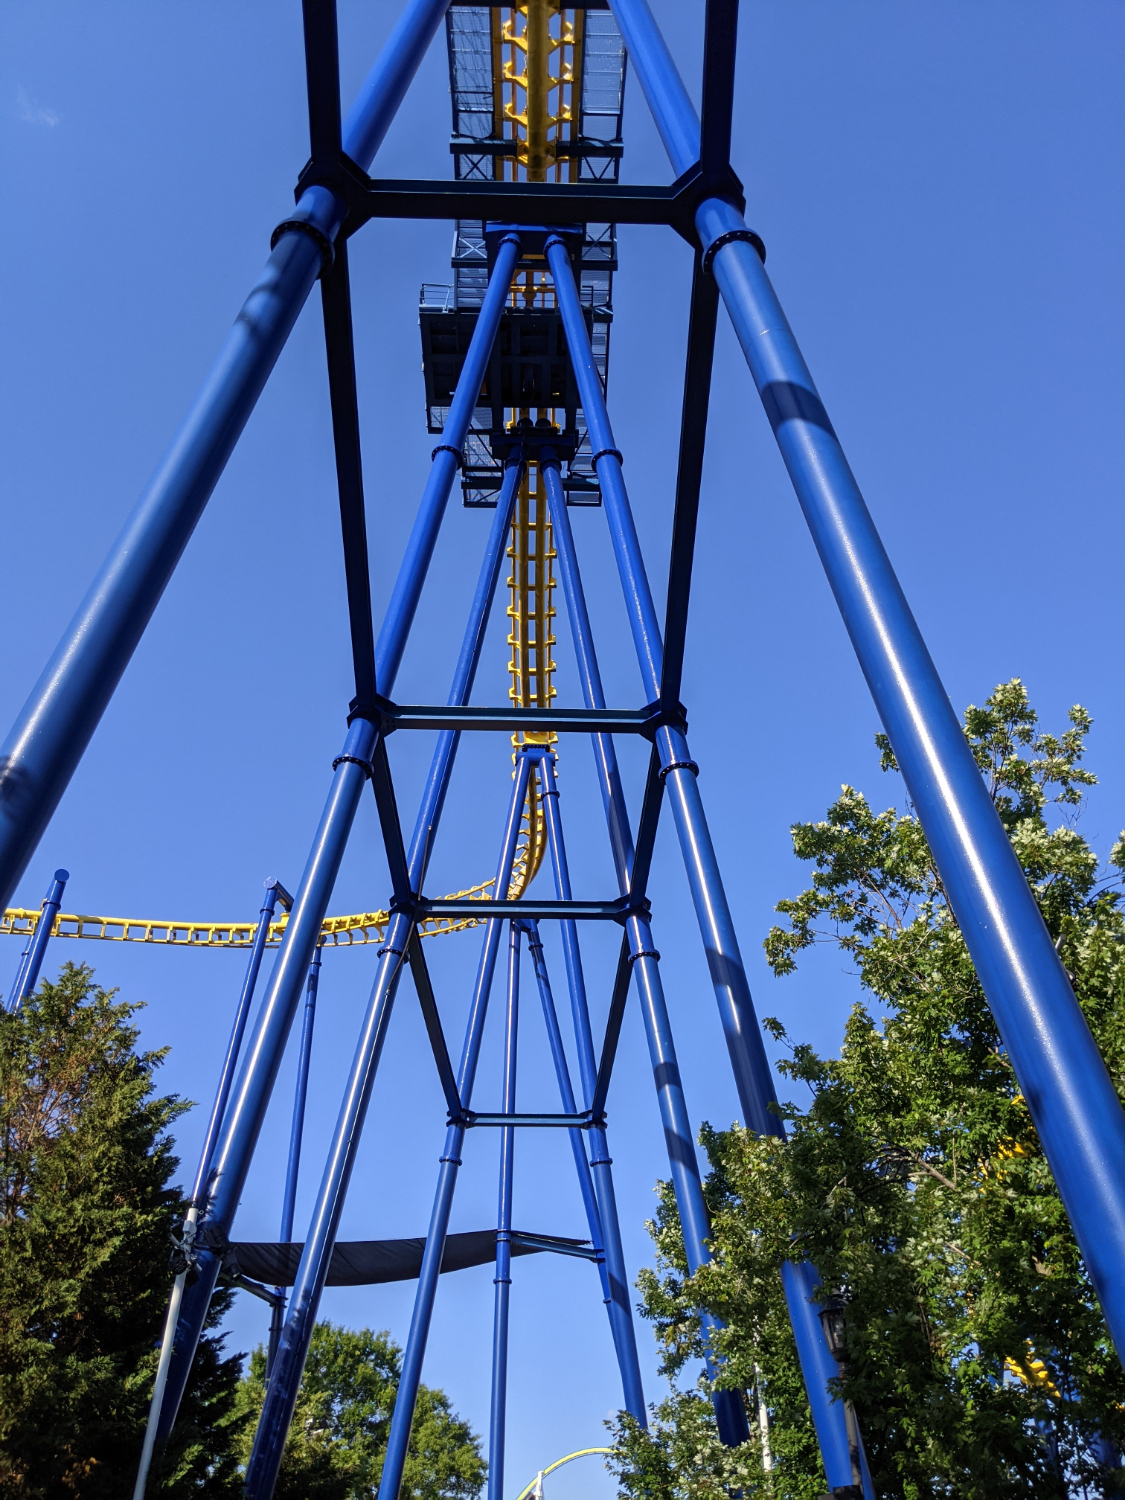 Carowinds Rides Ranked Roadtrips & Rollercoasters